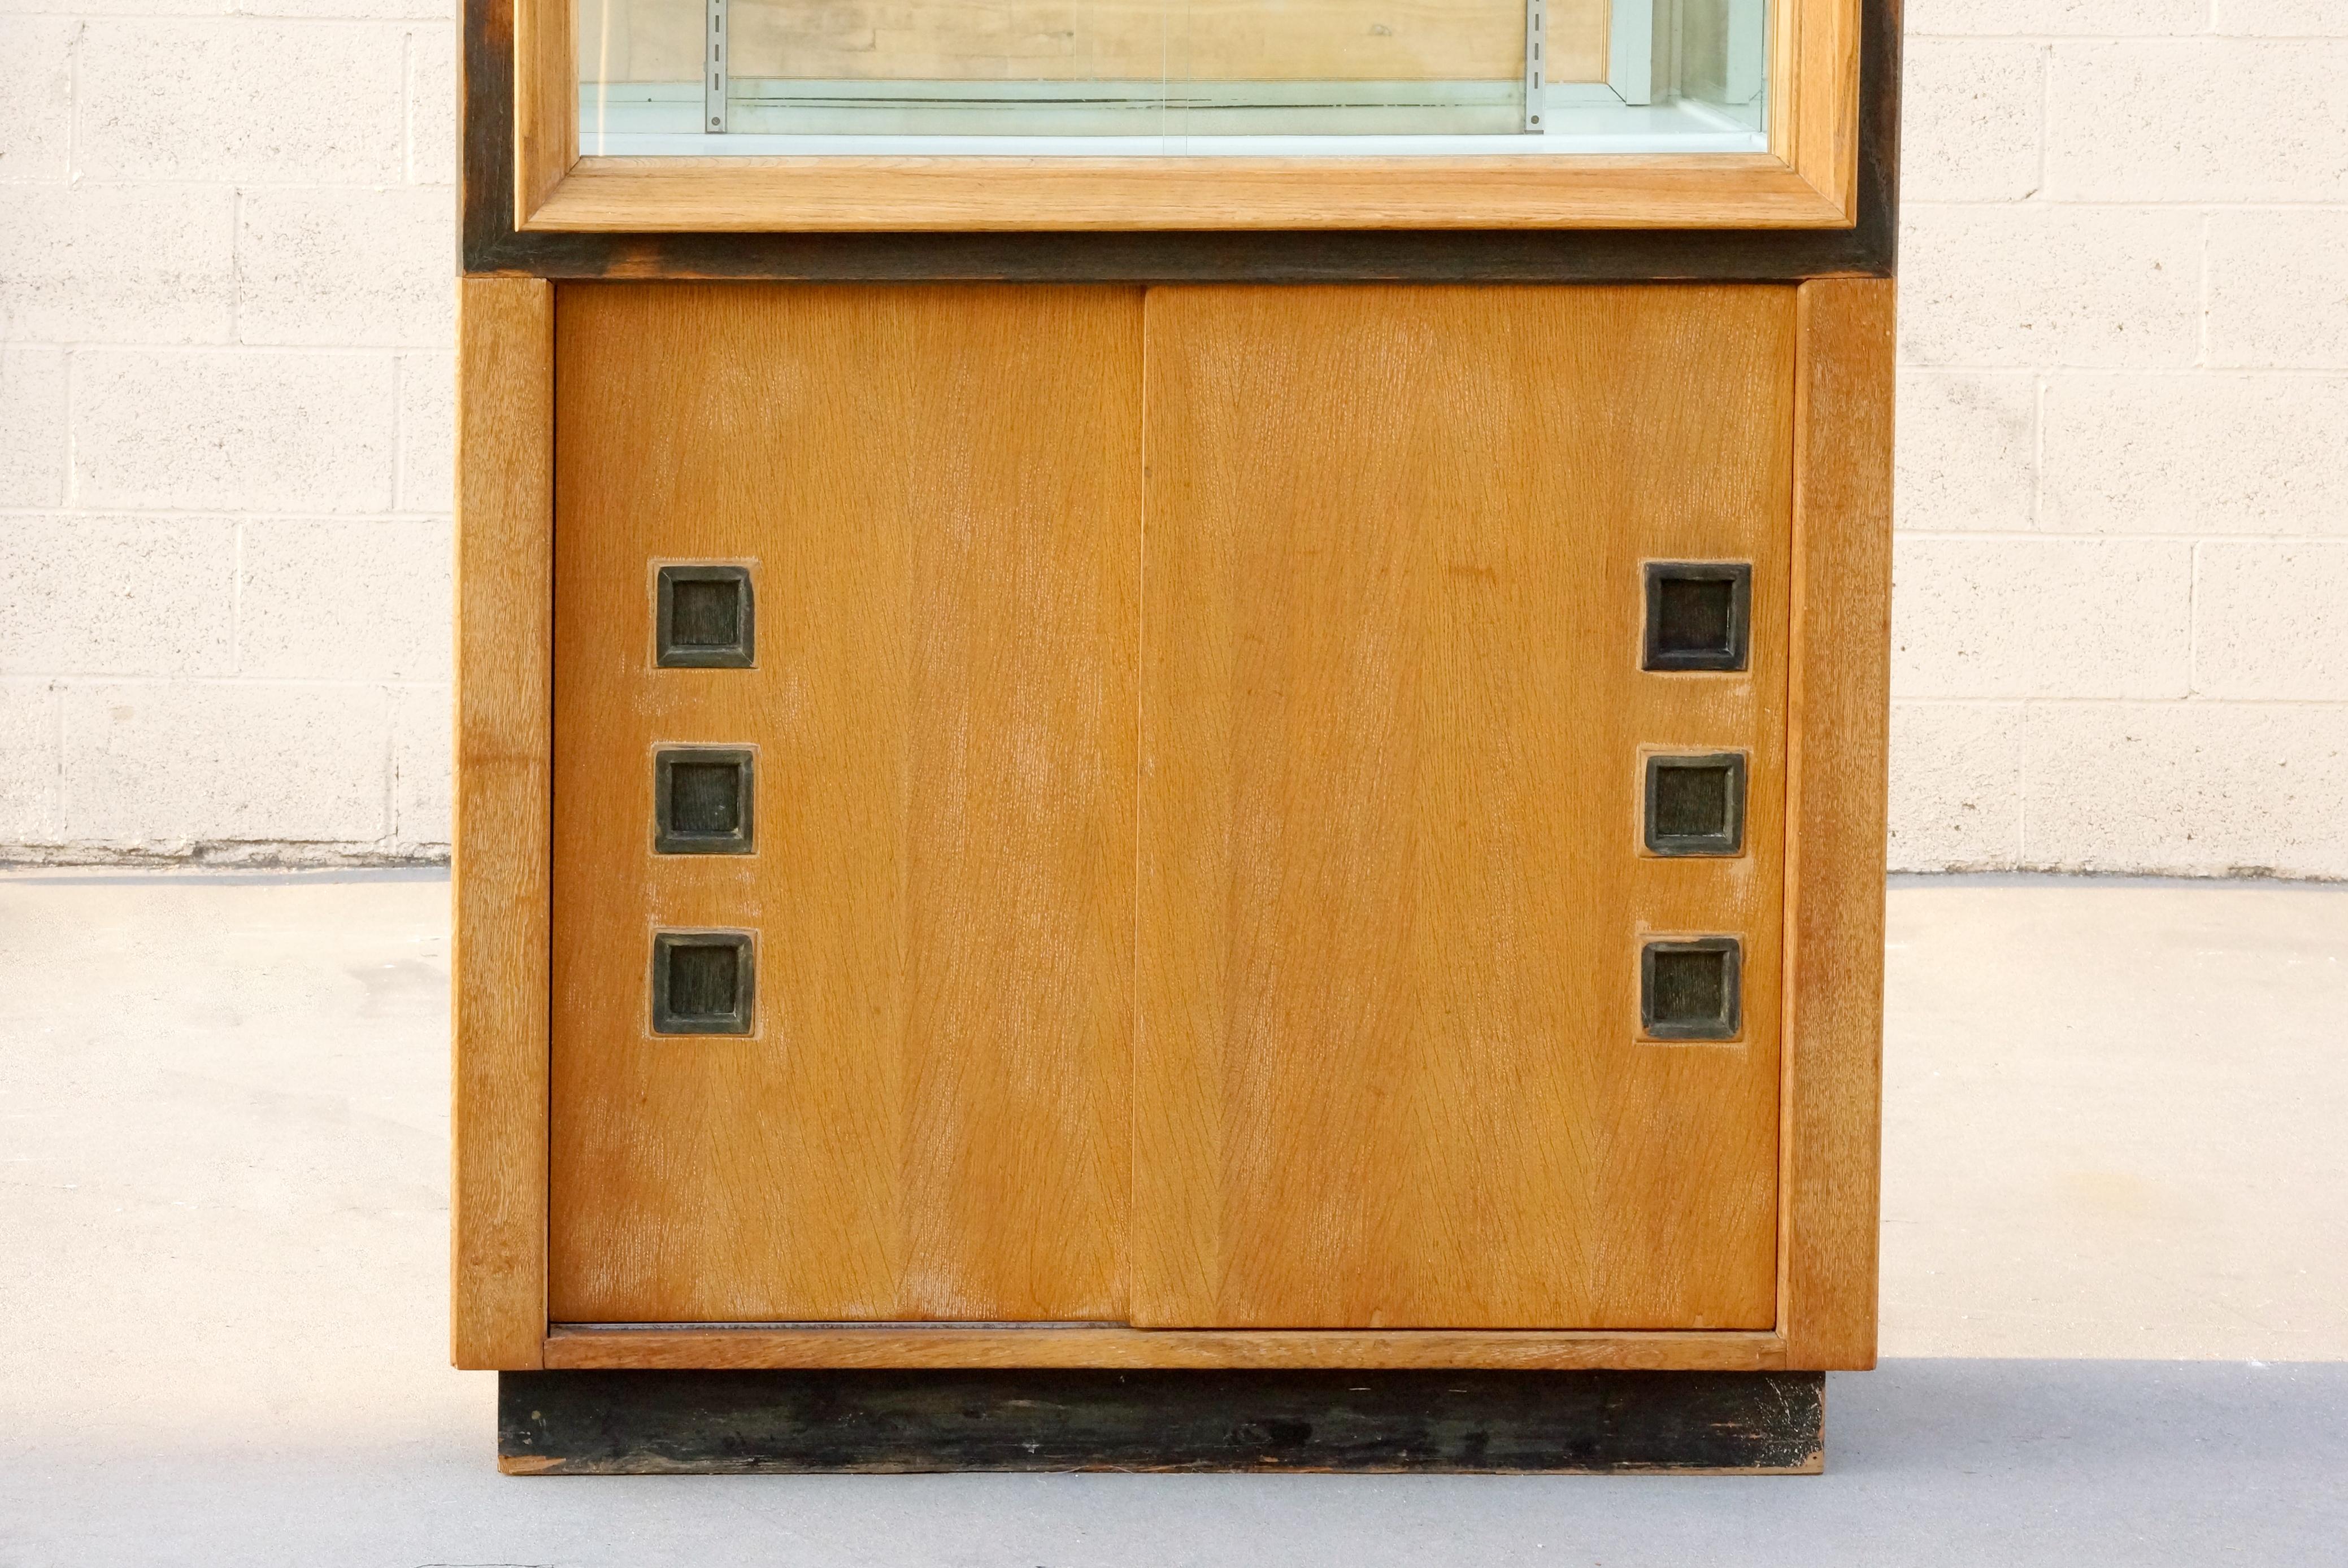 A most unique modernist display cabinet, unattributed but in the style of Paul Laszlo, circa 1940s. Composed of solid oak with sliding glass doors, adjustable glass shelves and mirror back on the top and sliding wood doors with wonderful inverted